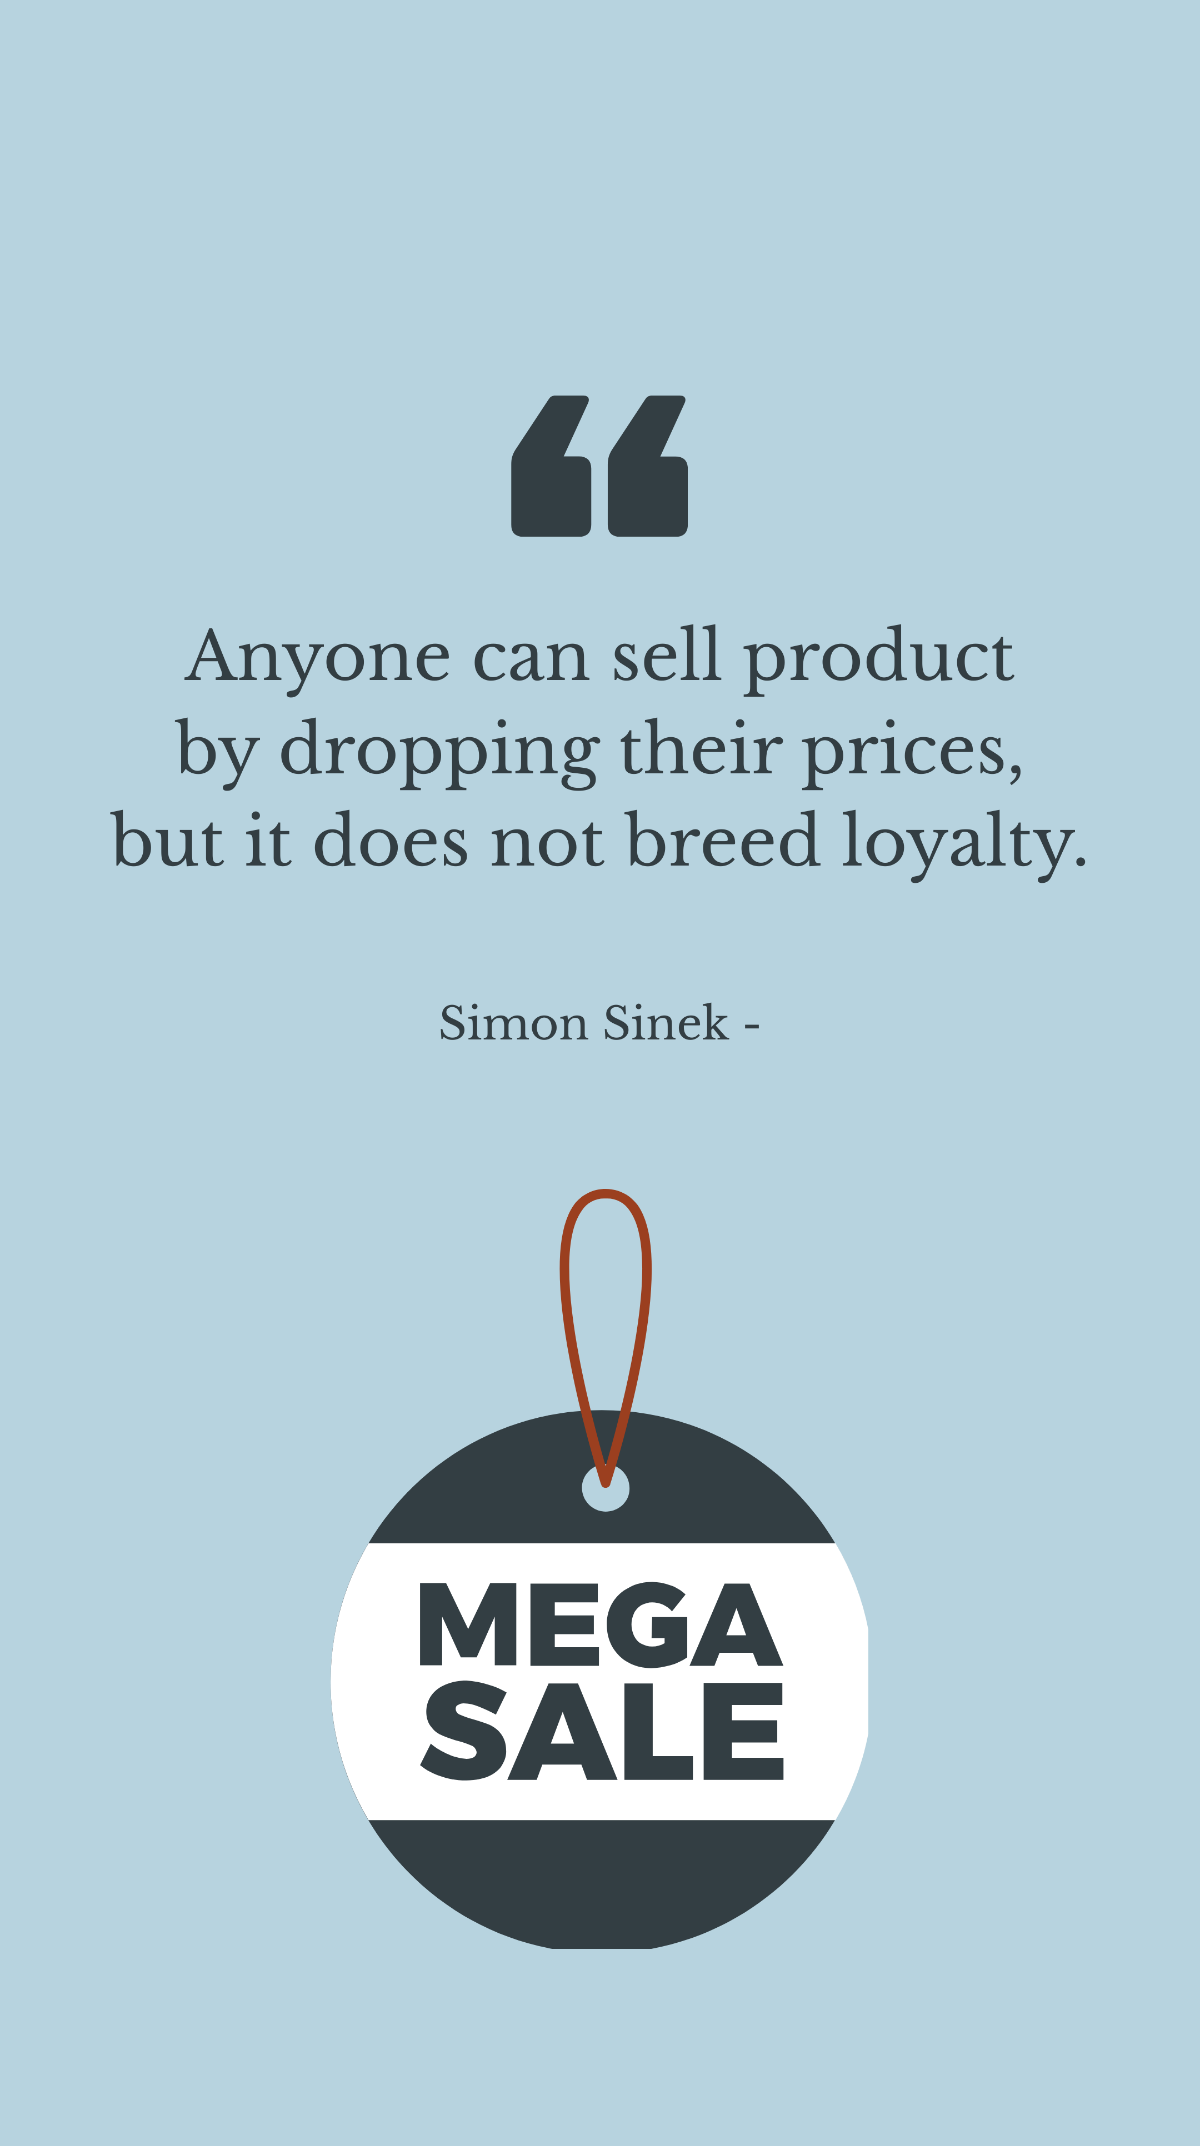 Simon Sinek - Anyone can sell product by dropping their prices, but it does not breed loyalty.